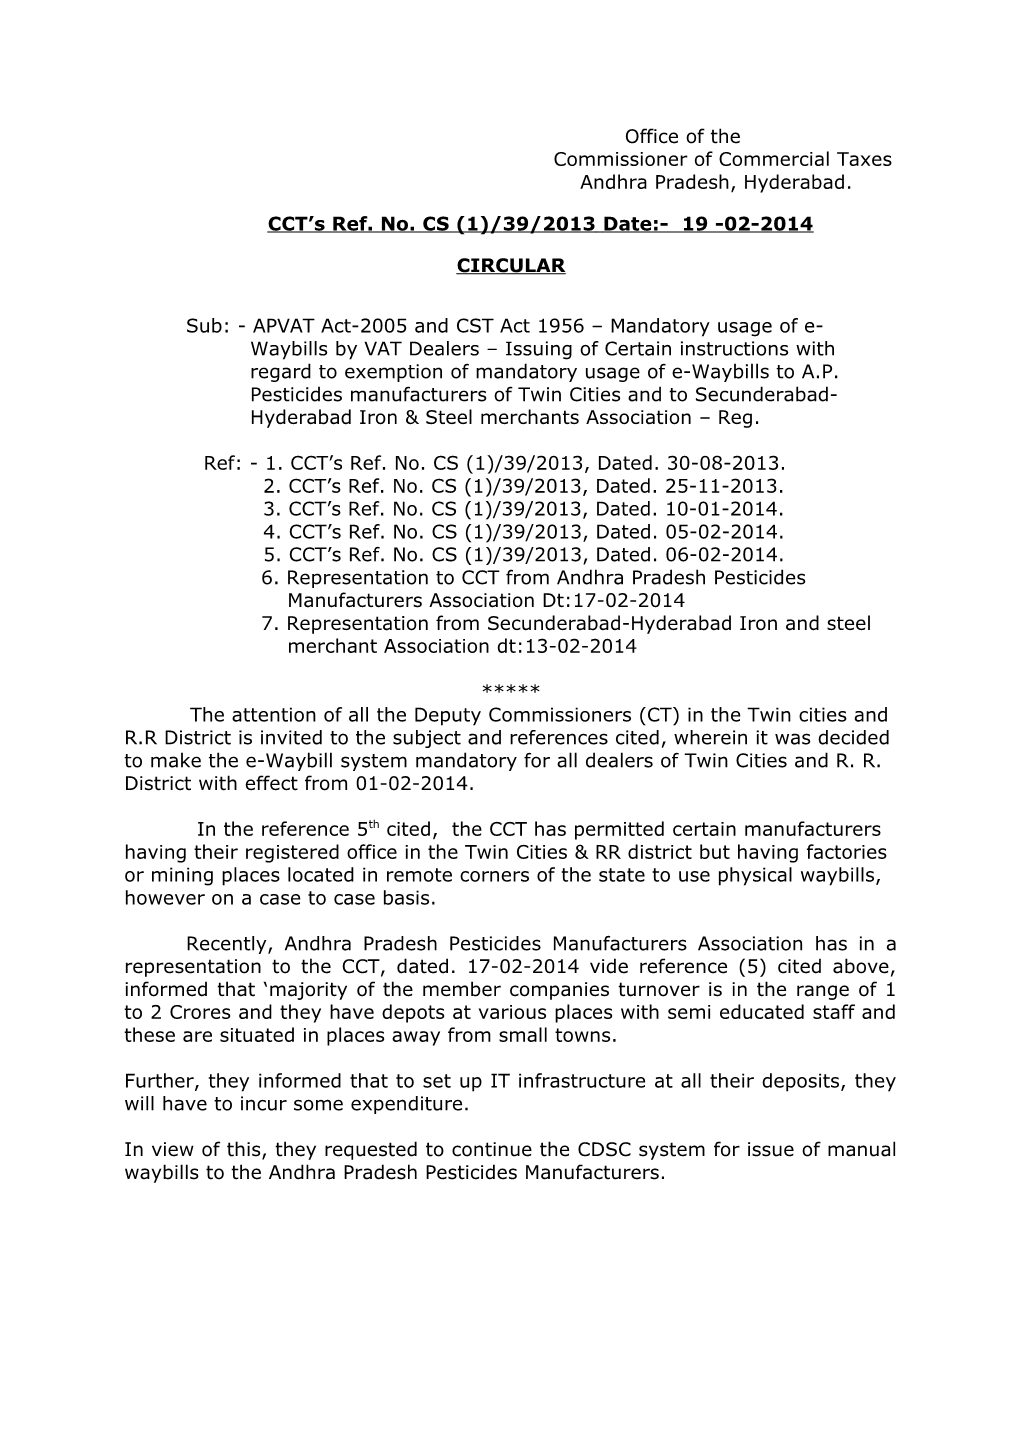 Sub: - APVAT Act-2005 and CST Act 1956 Mandatory Usage of E